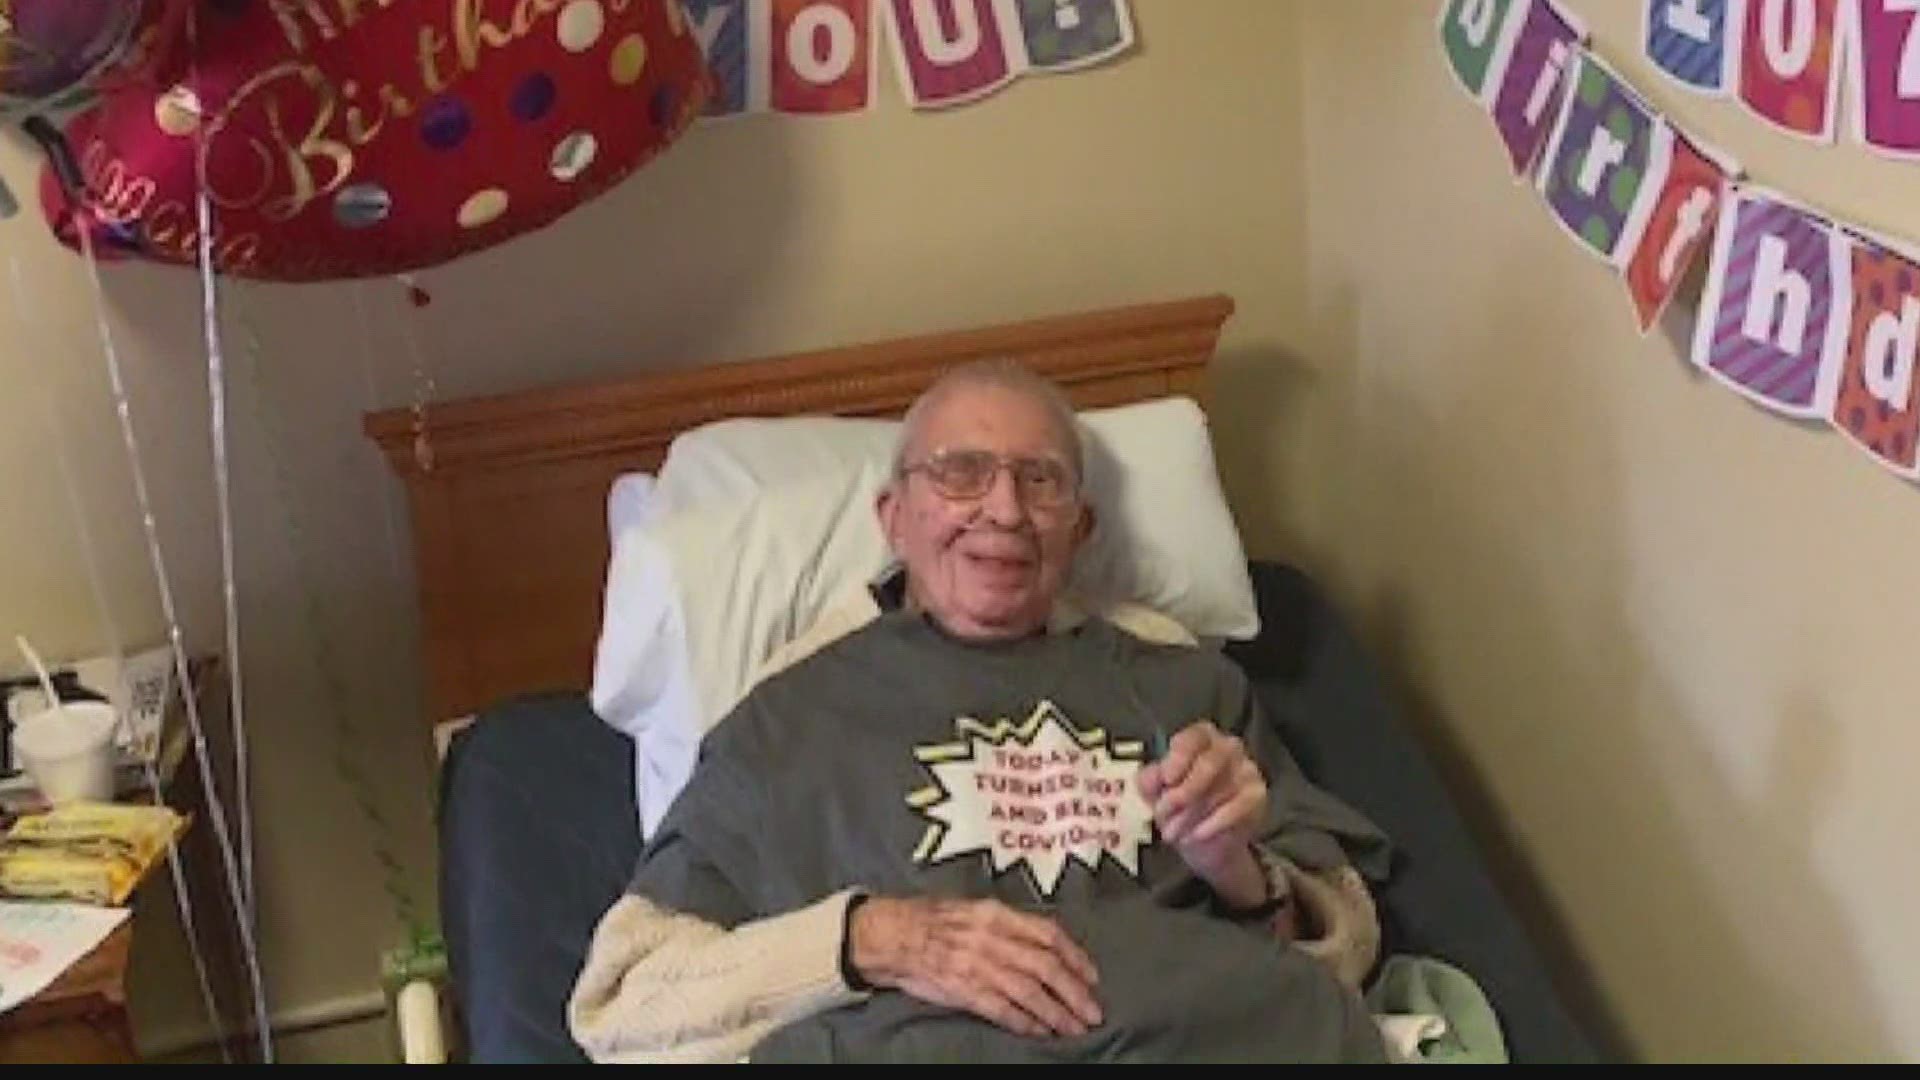 Rudi Heiber was born before both world wars and lived through the Spanish flu epedemic. Now, he's celebrating turning 107 by beating COVID-19